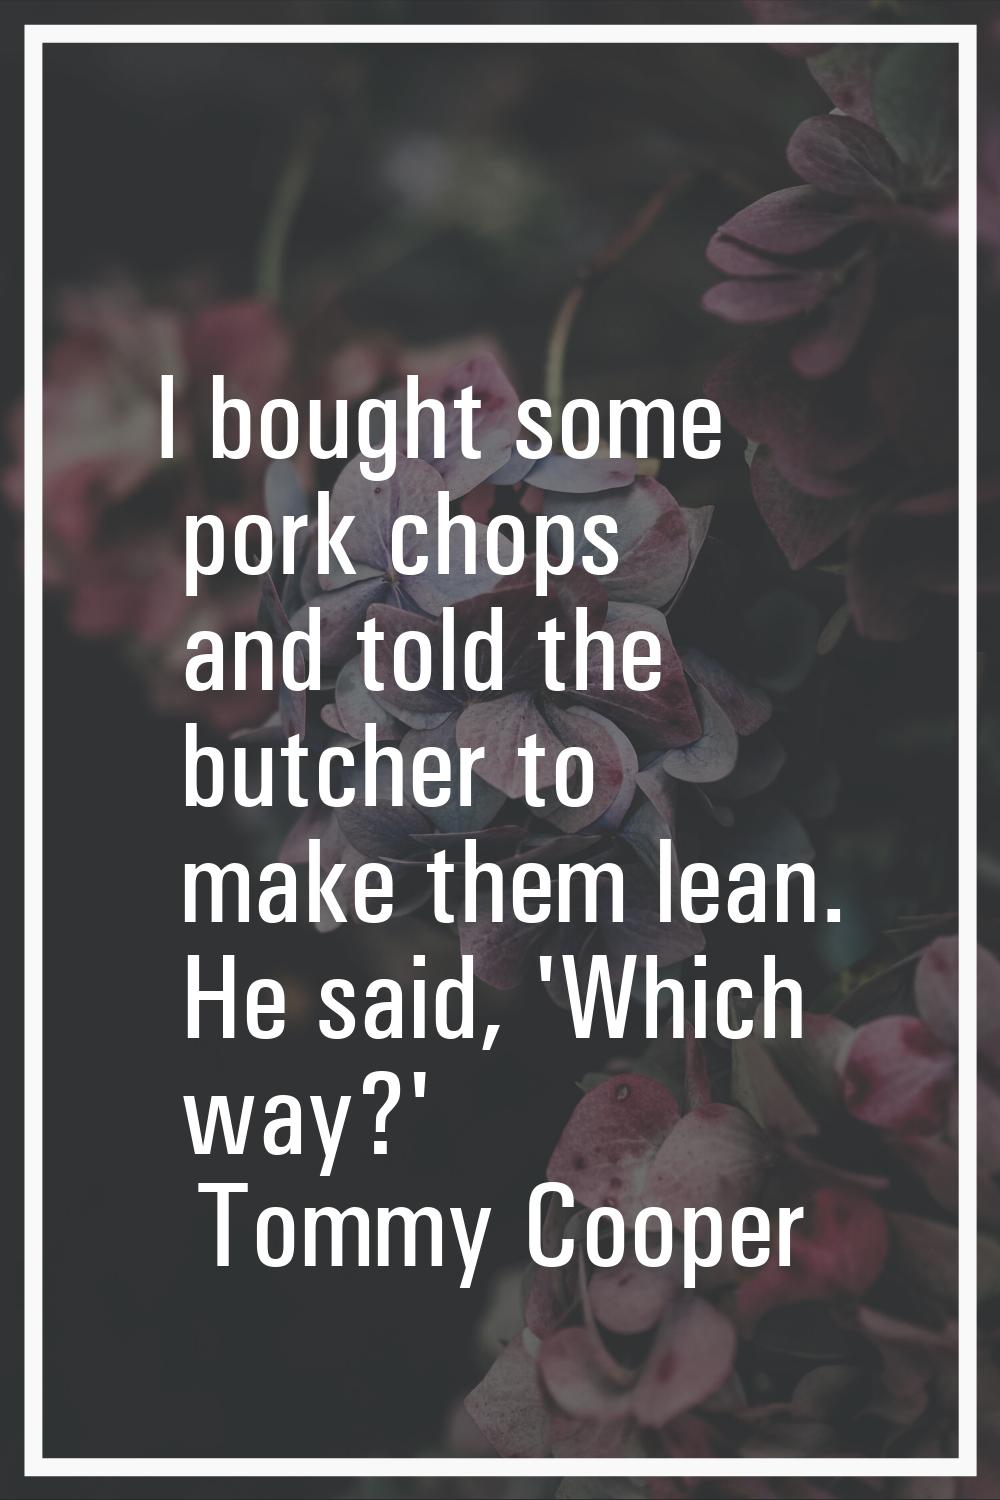 I bought some pork chops and told the butcher to make them lean. He said, 'Which way?'